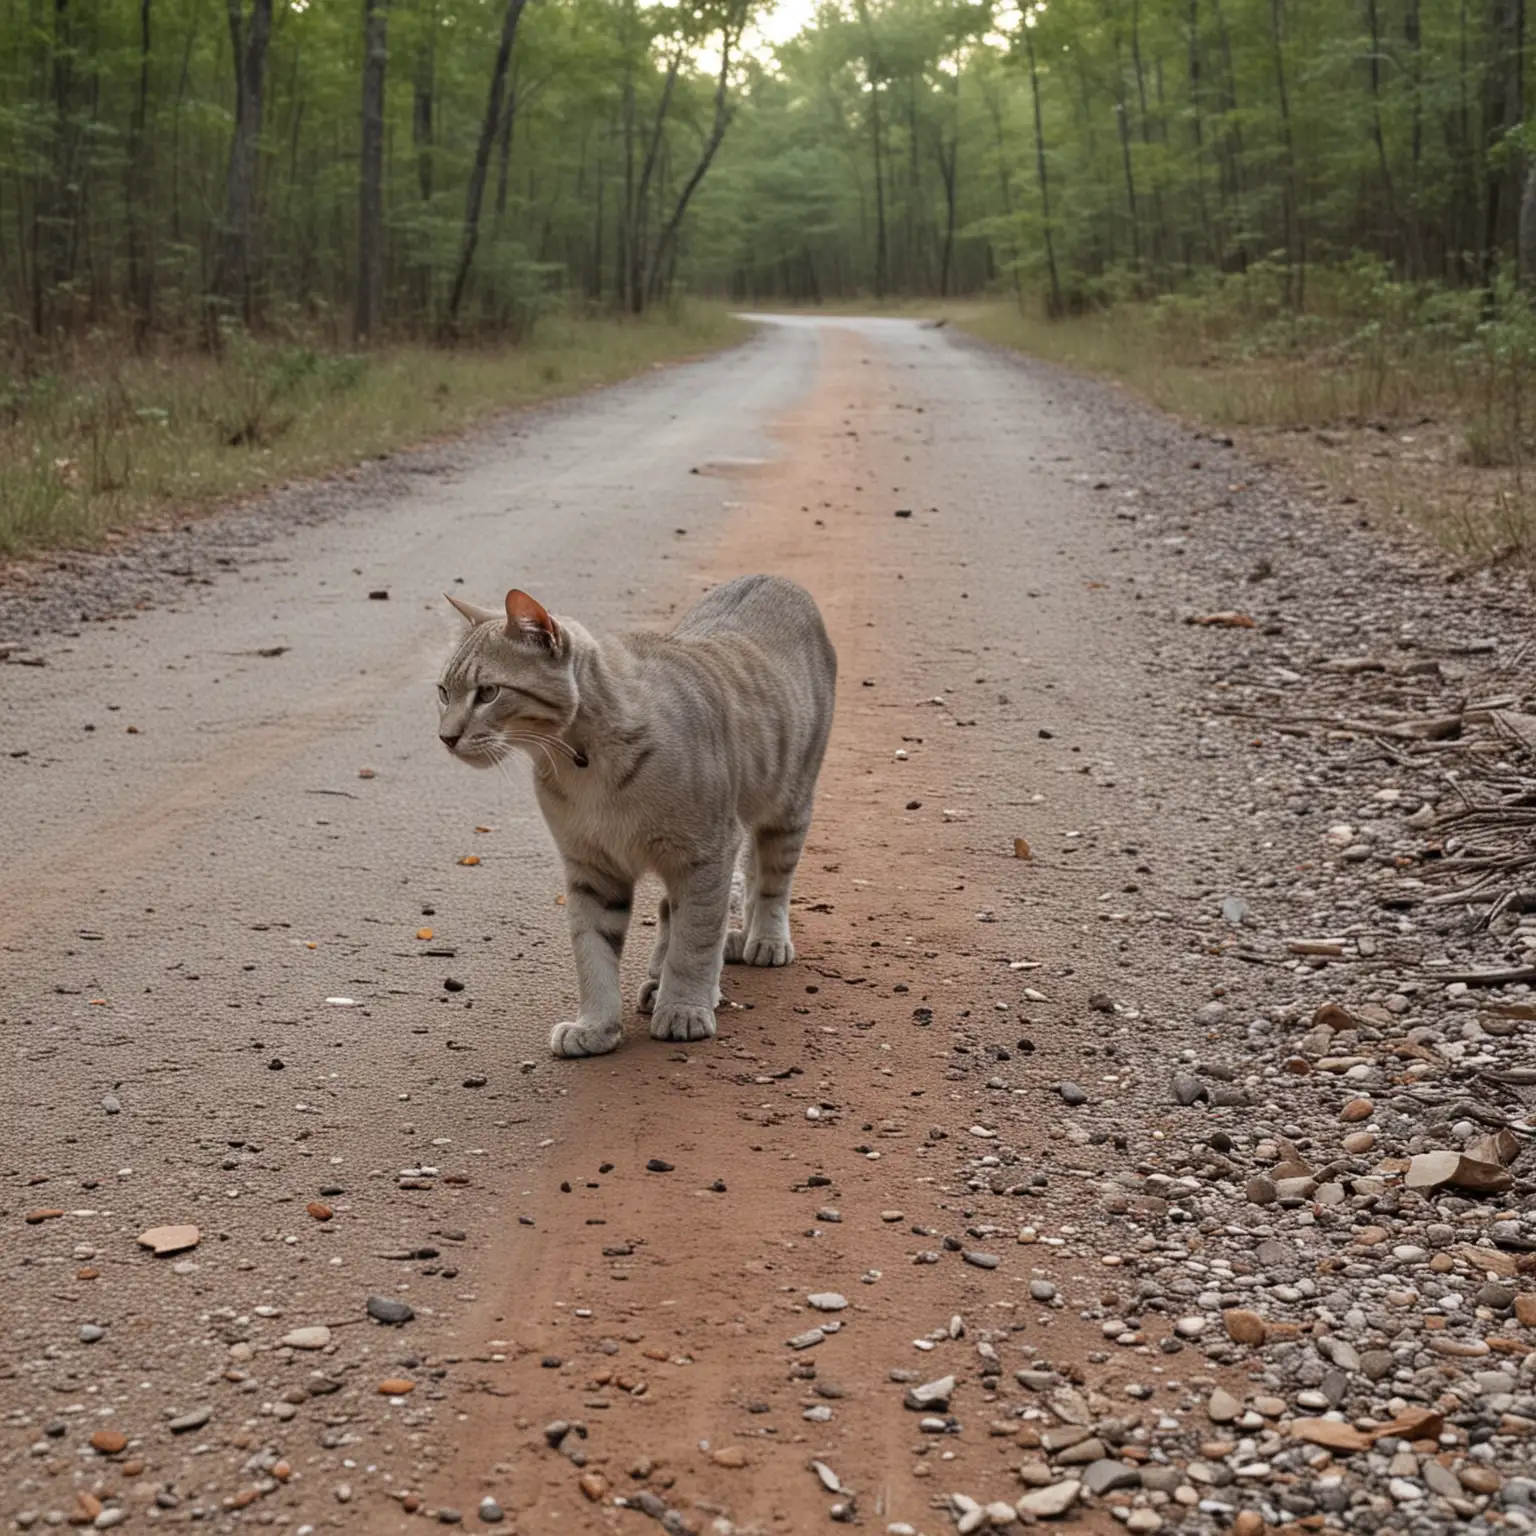 seeing a wampus cat appear on a deserted dirt road in a forest in Arkansas